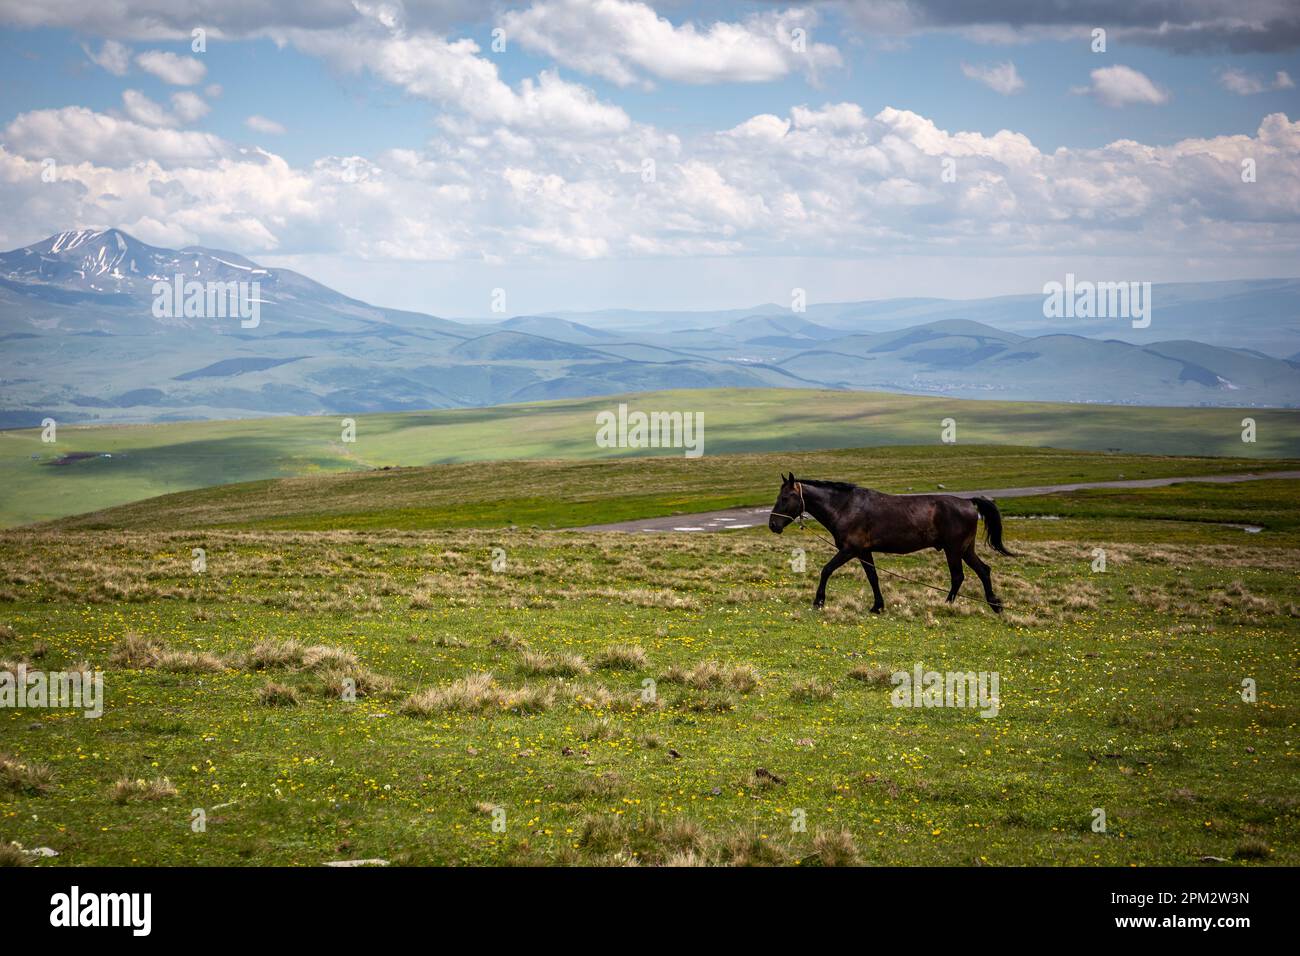 Kabarda horse, Caucasian breed horse, galoping through the grasslands of Javakheti Plateau with ancient dormant volcanoes and mountains. Stock Photo